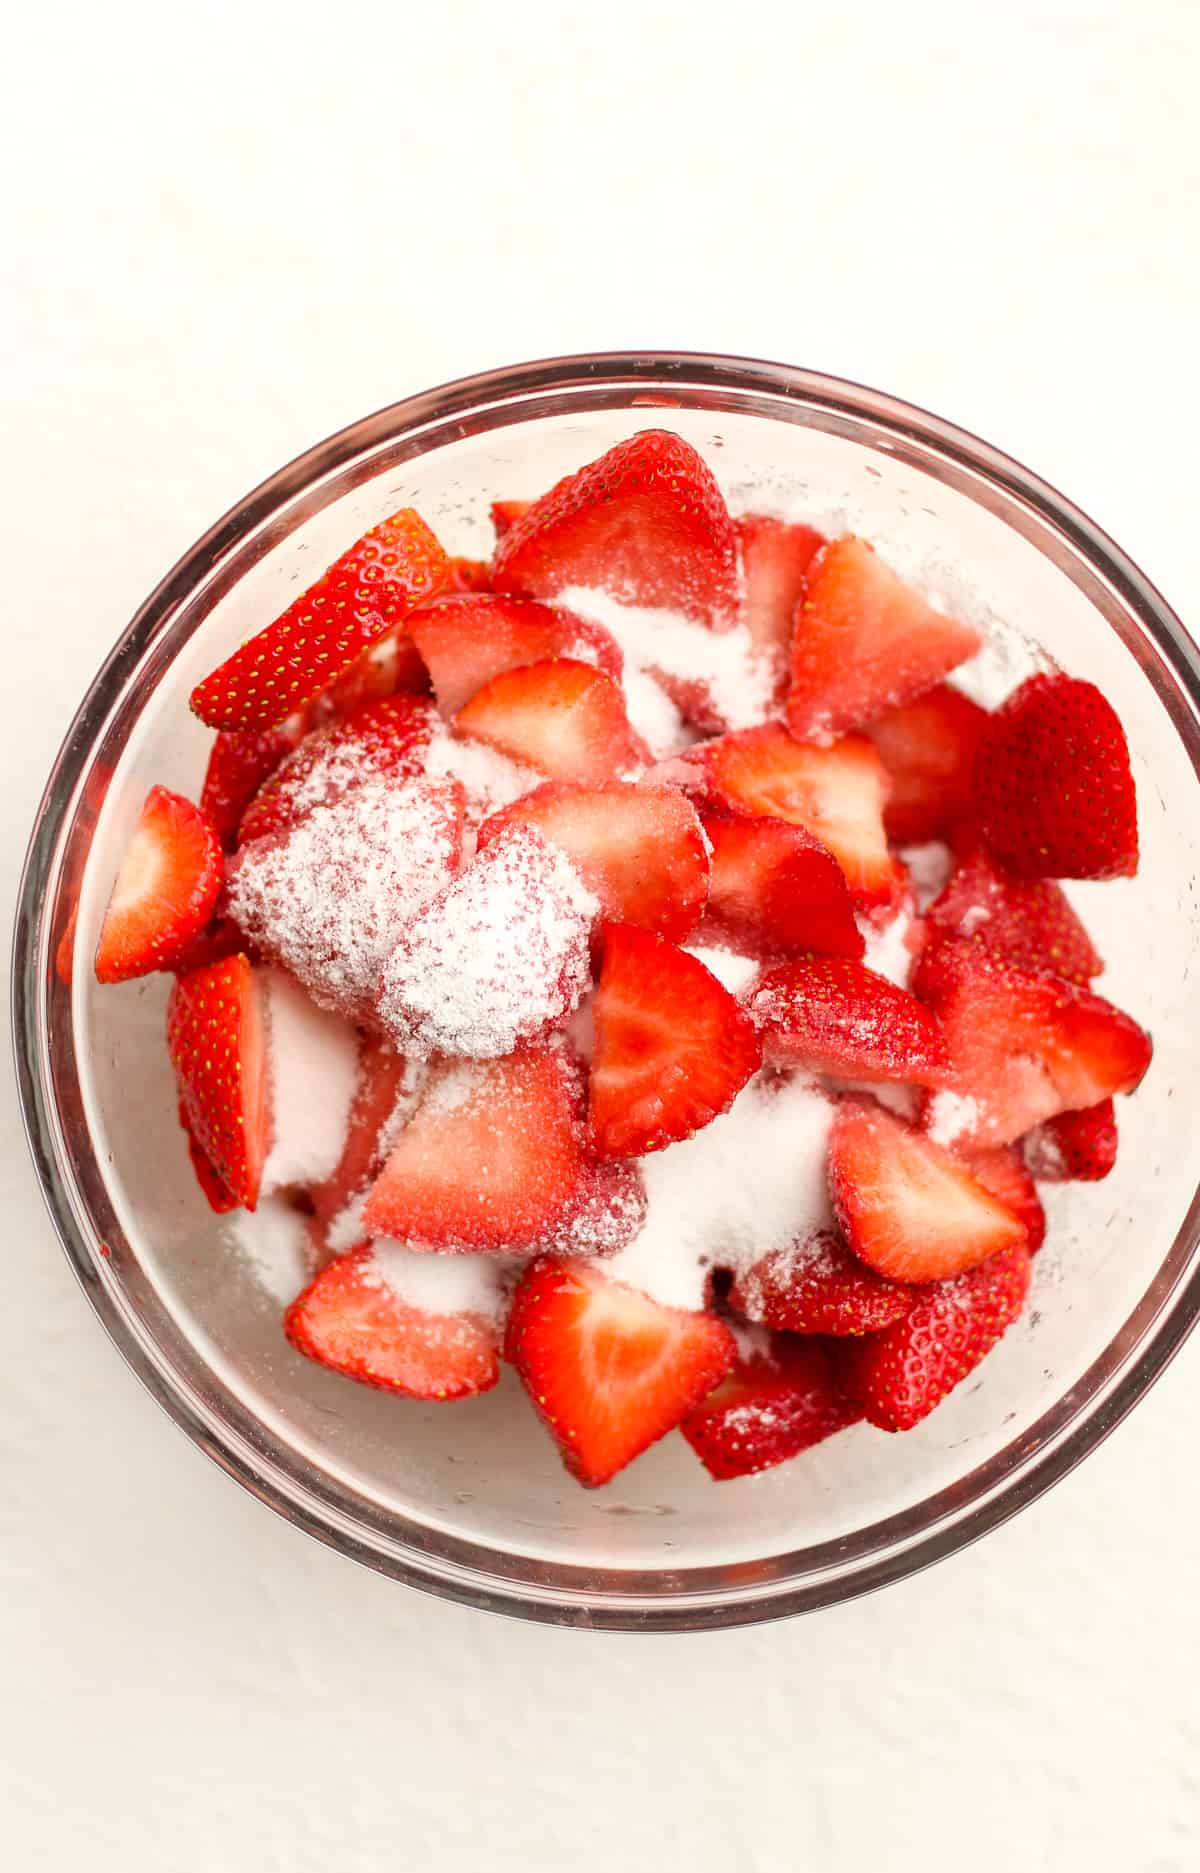 A bowl of shoe sliced strawberries with sugar.